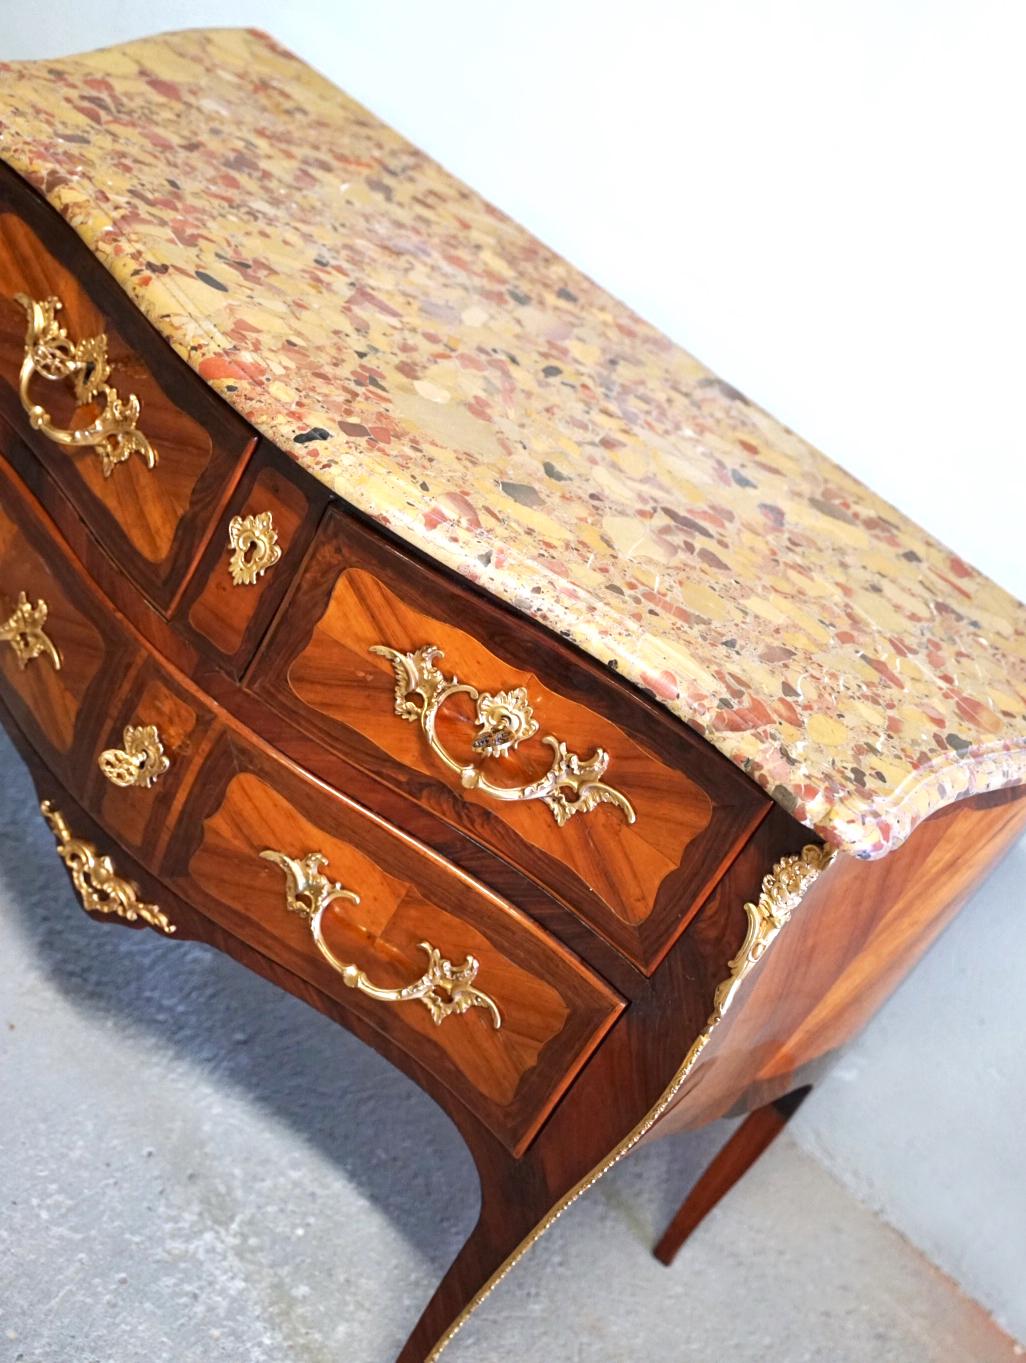 Malle Louis Noël Stamped Wooden Chest Of Drawers, Paris 18th Century For Sale 8